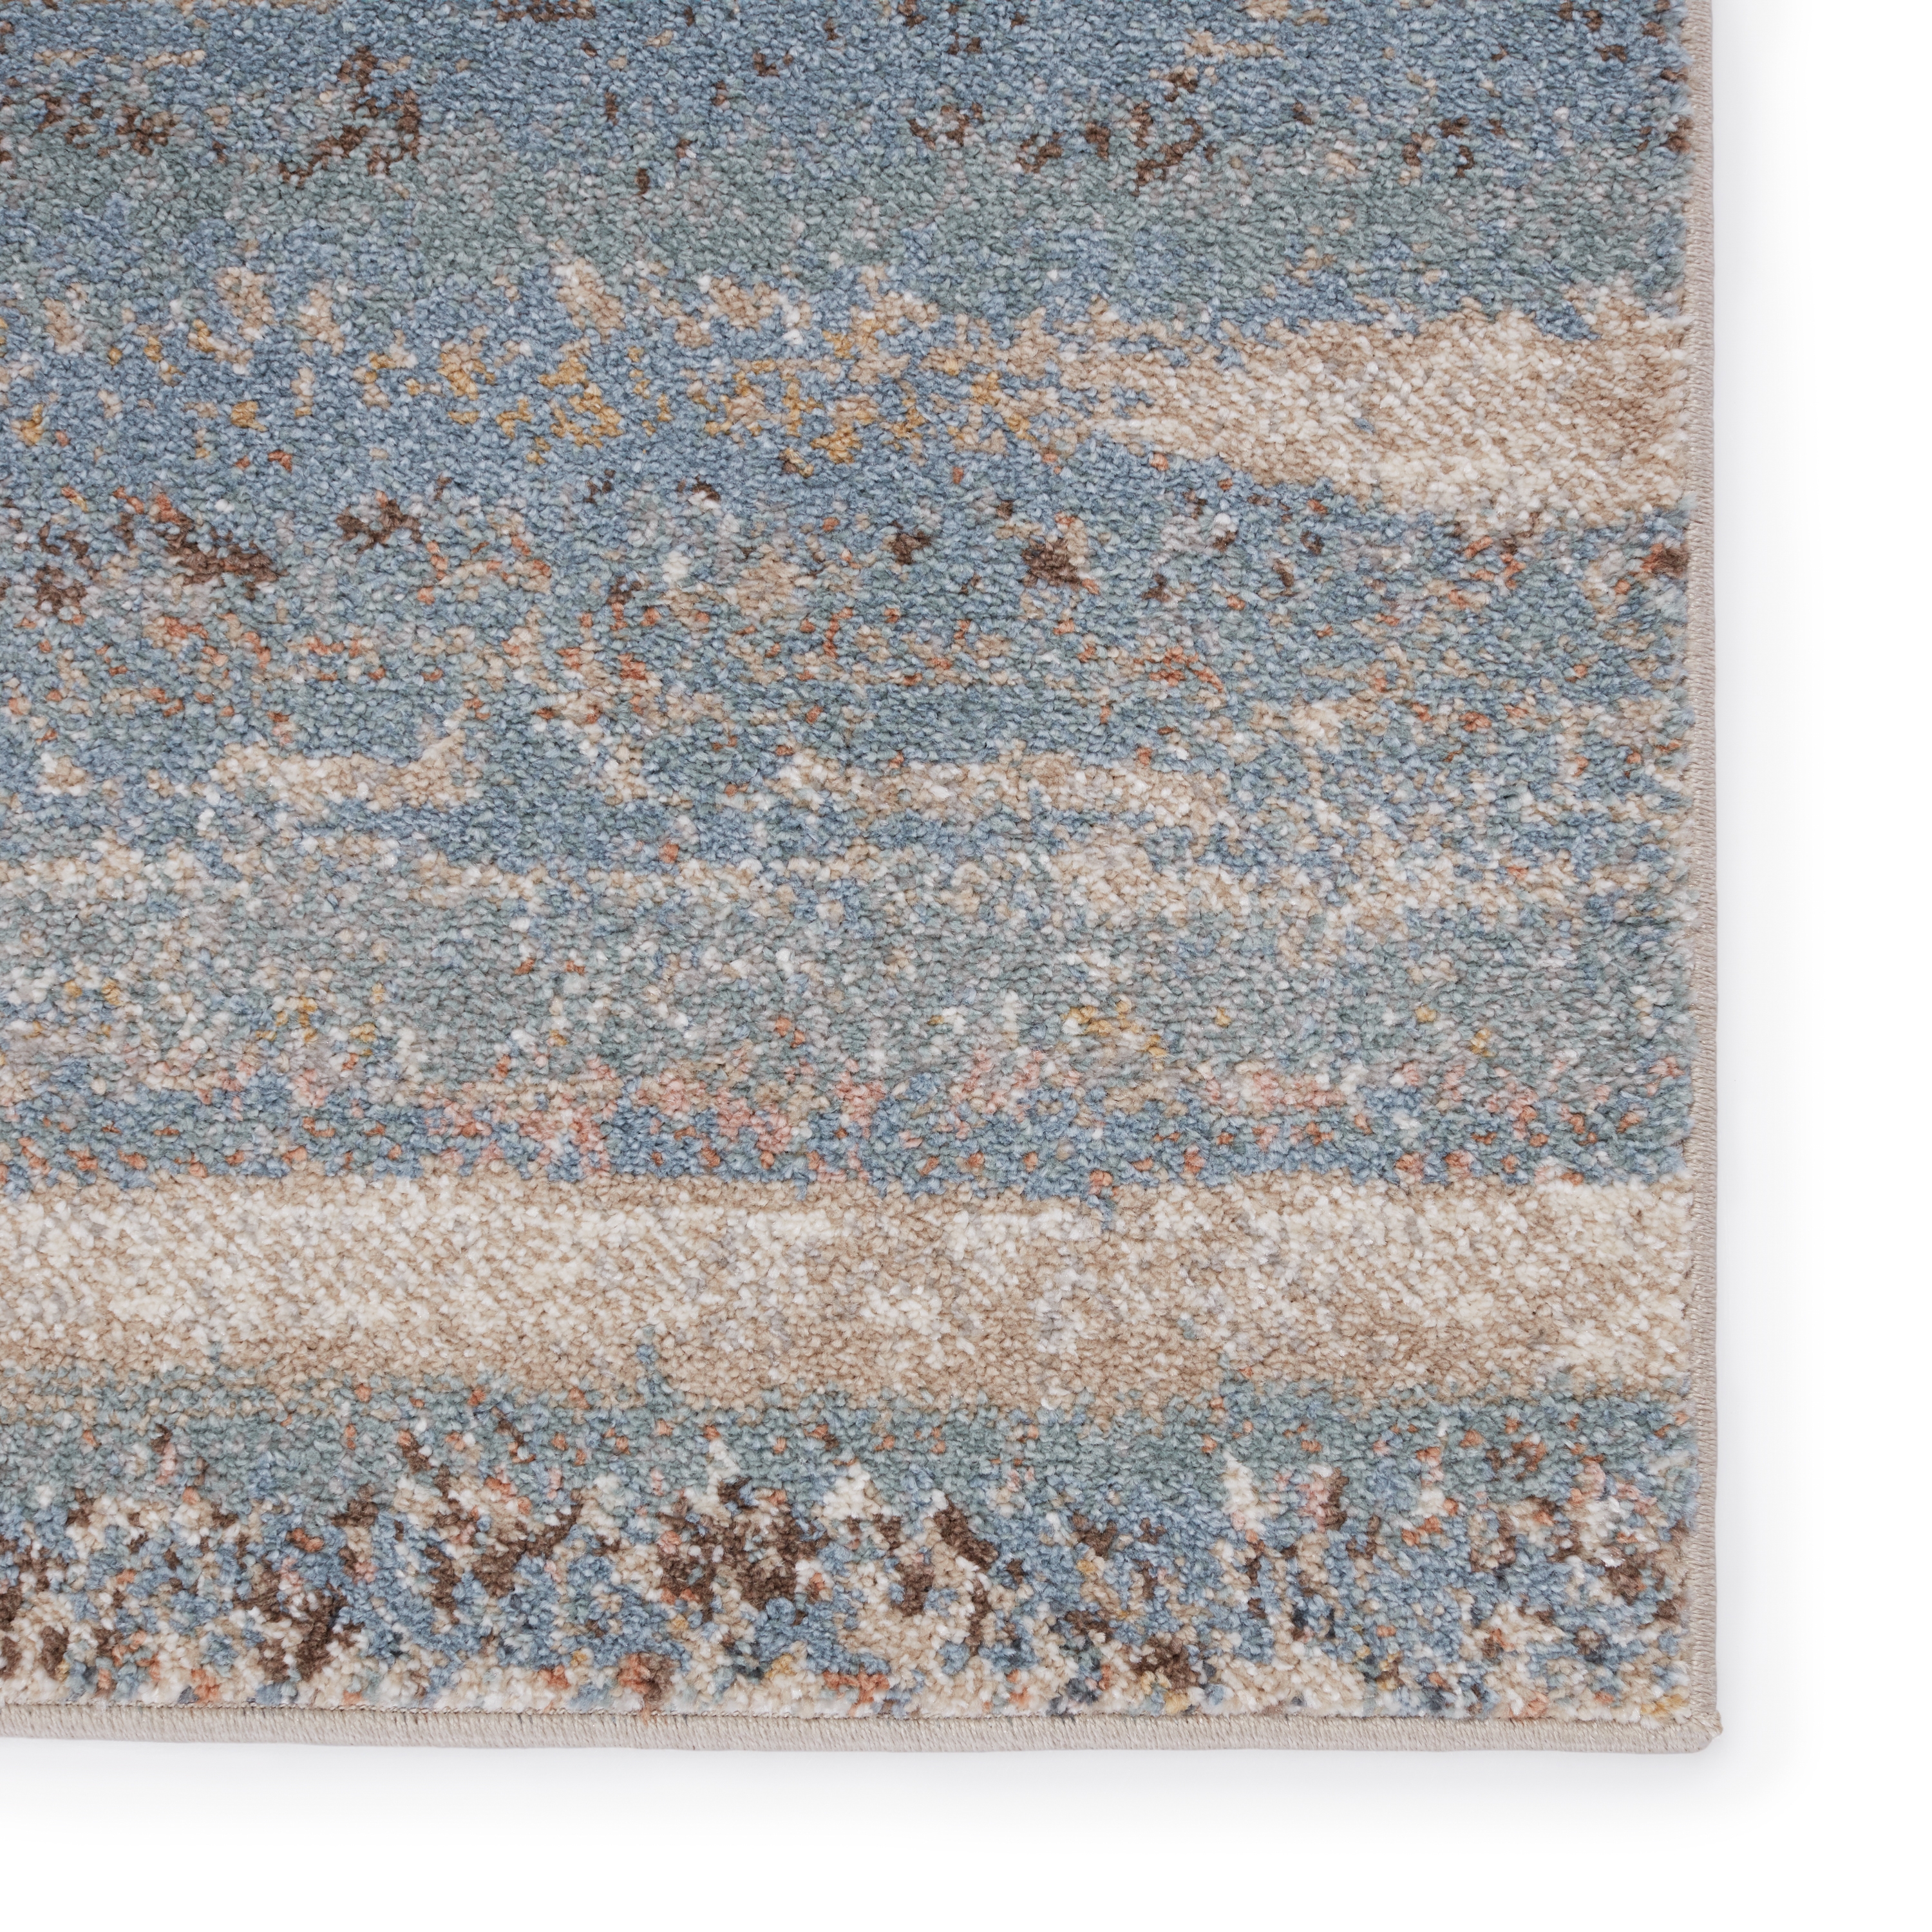 Vibe by Devlin Abstract Blue/ Tan Area Rug (6'7"X9'6") - Image 3